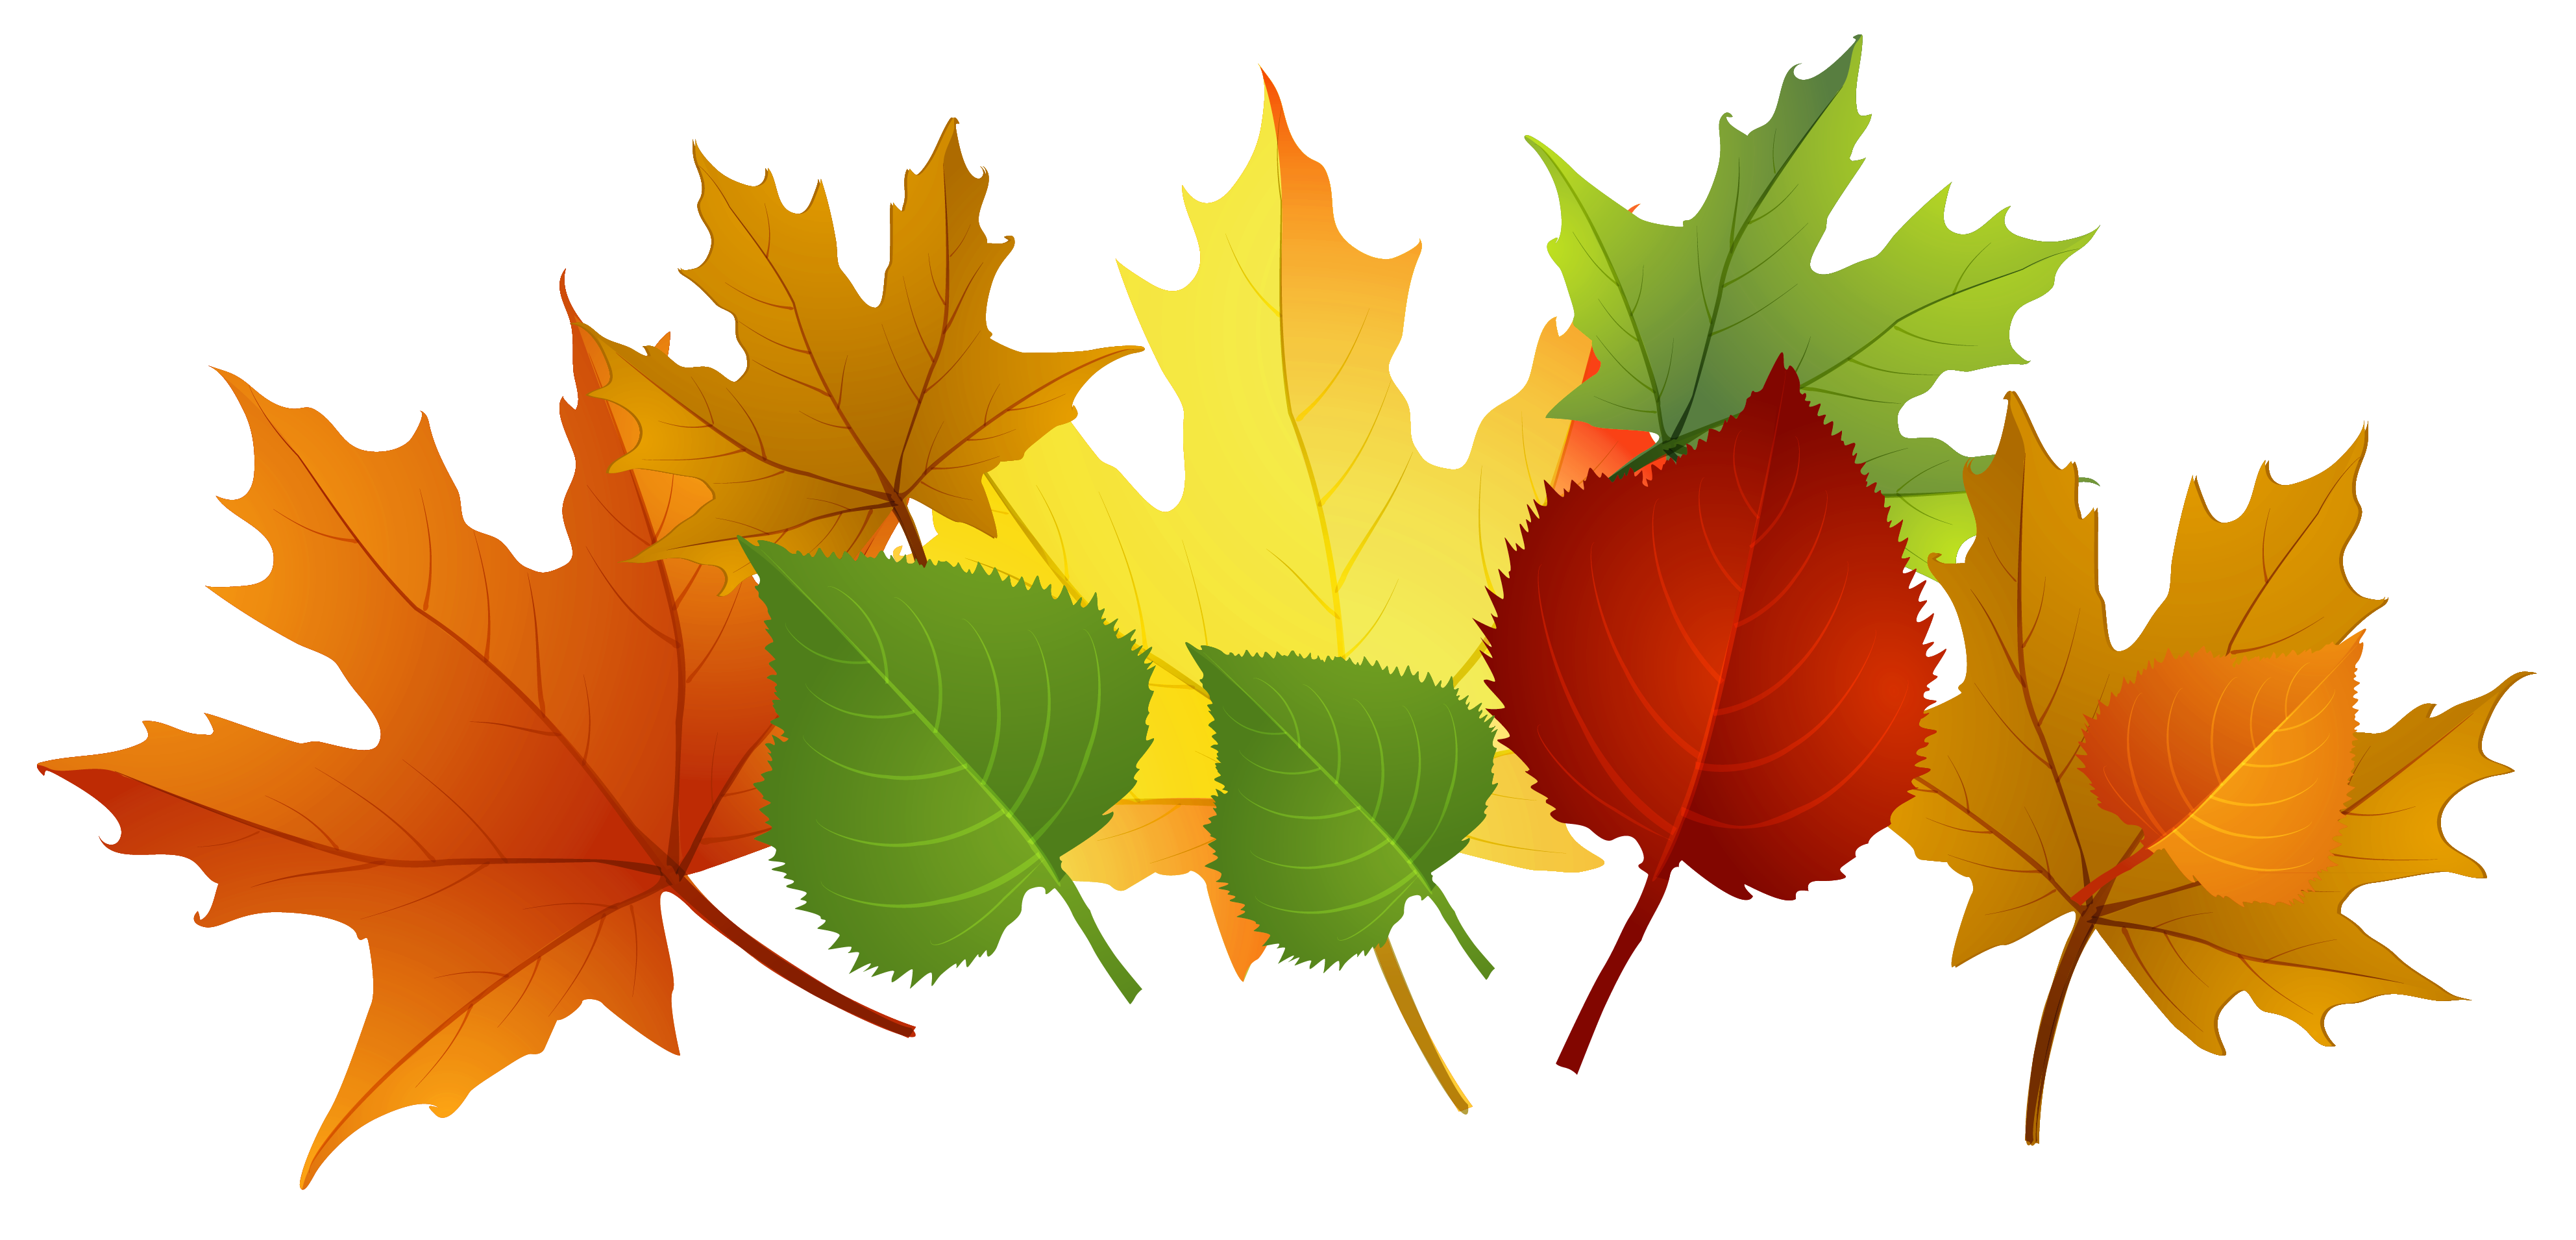 free clipart images leaves - photo #16